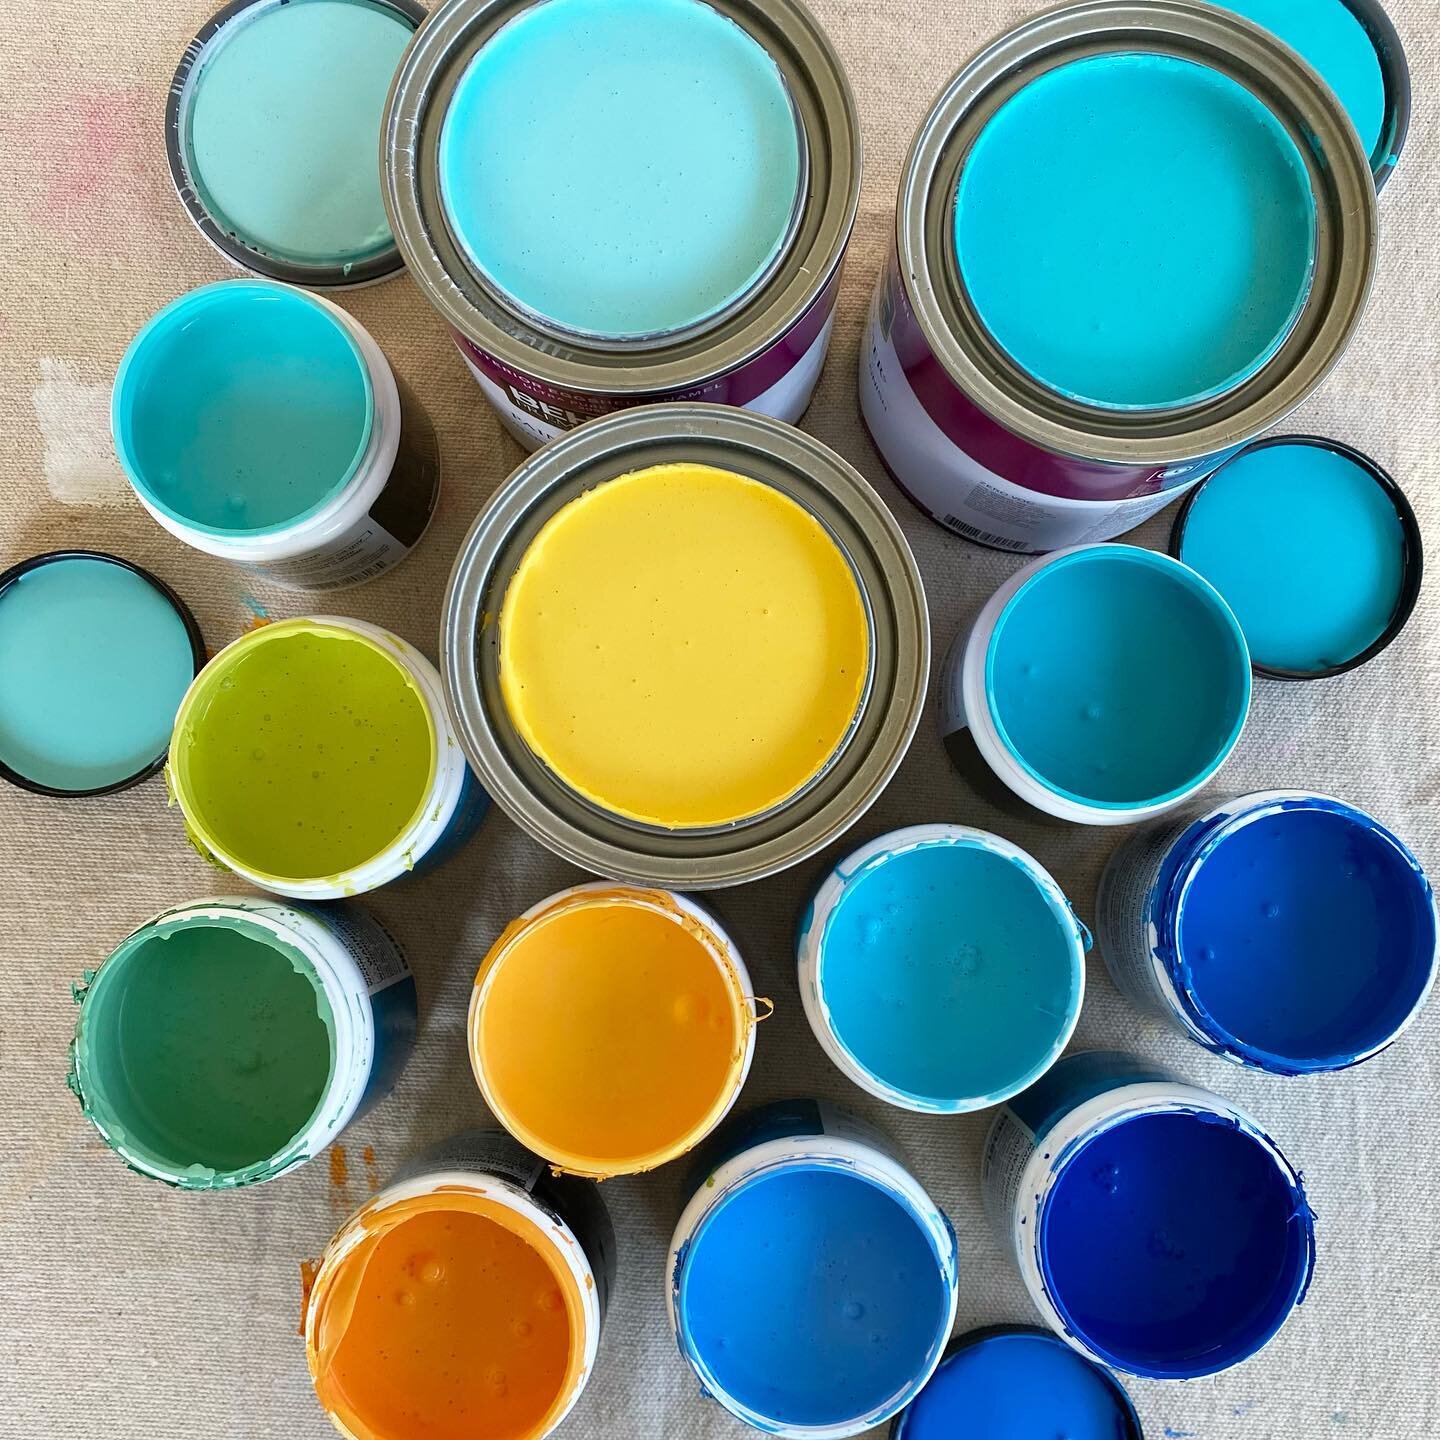 Post a PHOTO?! I know&hellip;I&rsquo;m wild, but I felt inspired by the vibrant palette about to hit the walls of the Kid&rsquo;s Club at @brokensoundclub in Boca Raton. Get ready for a fun custom kid&rsquo;s mural with lots of bright color.🎨

#boca